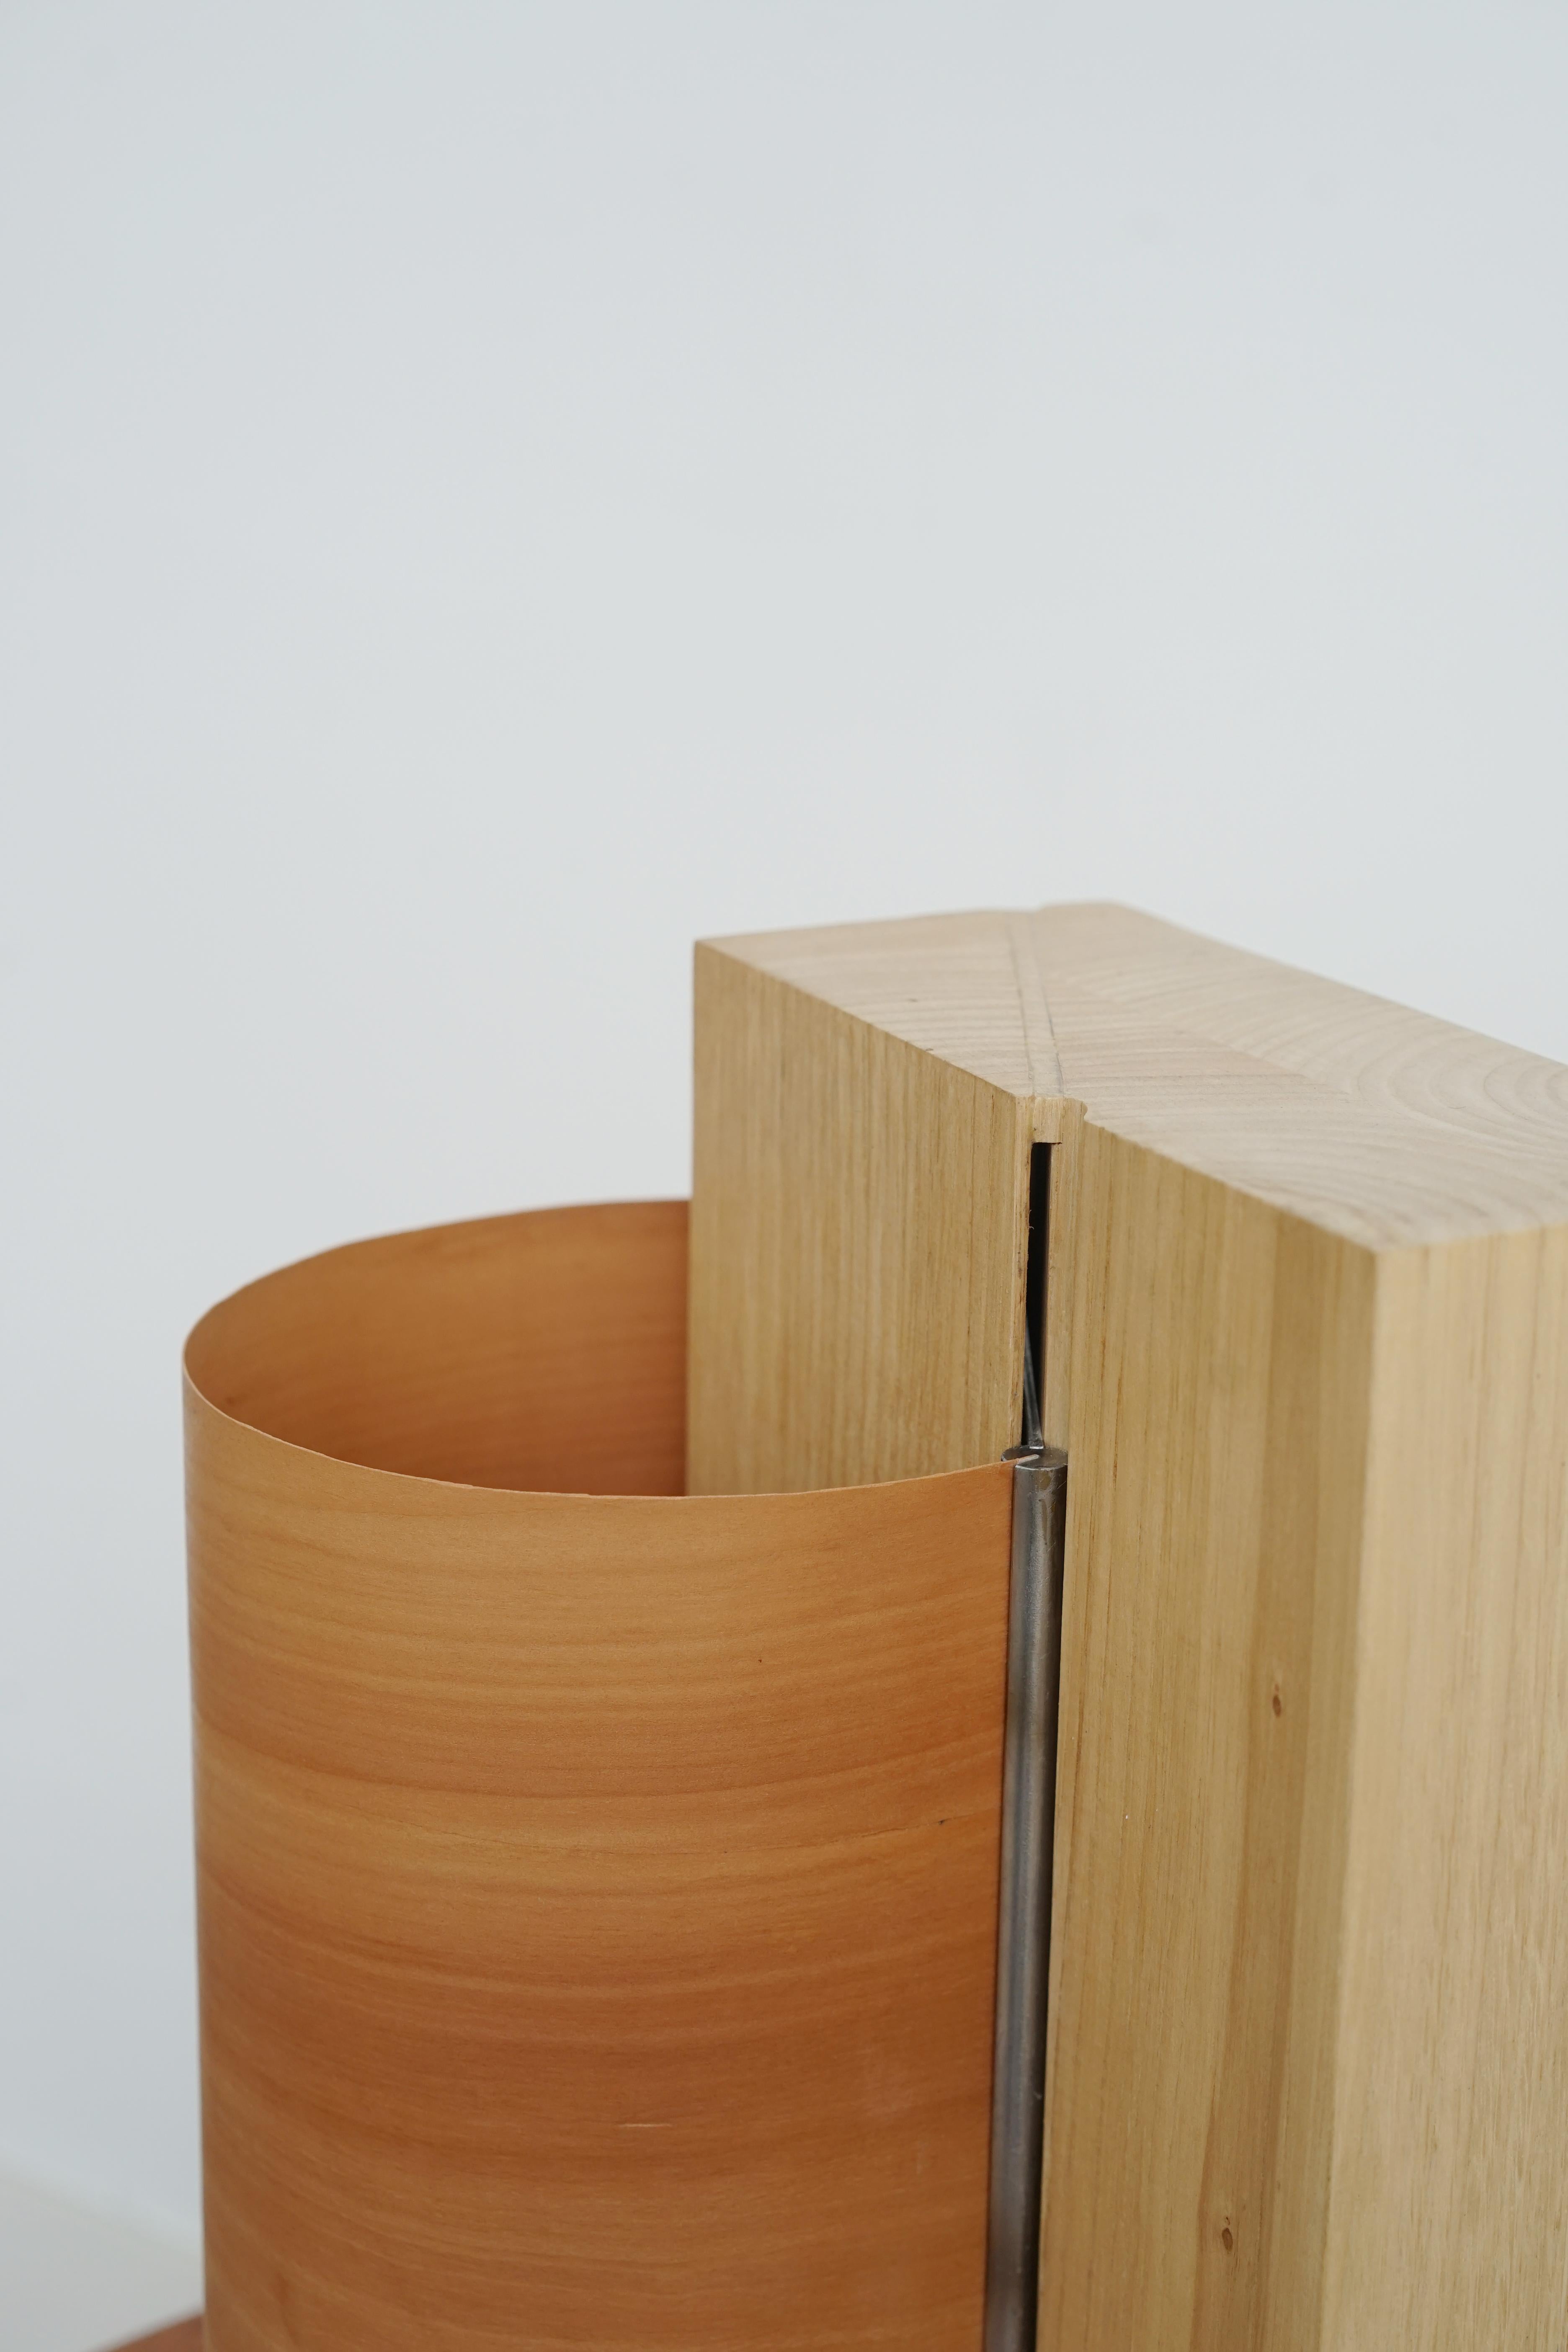 Table Lamp 6/10, Oak and Pear Wood, Handmade in France, OROS Edition For Sale 1